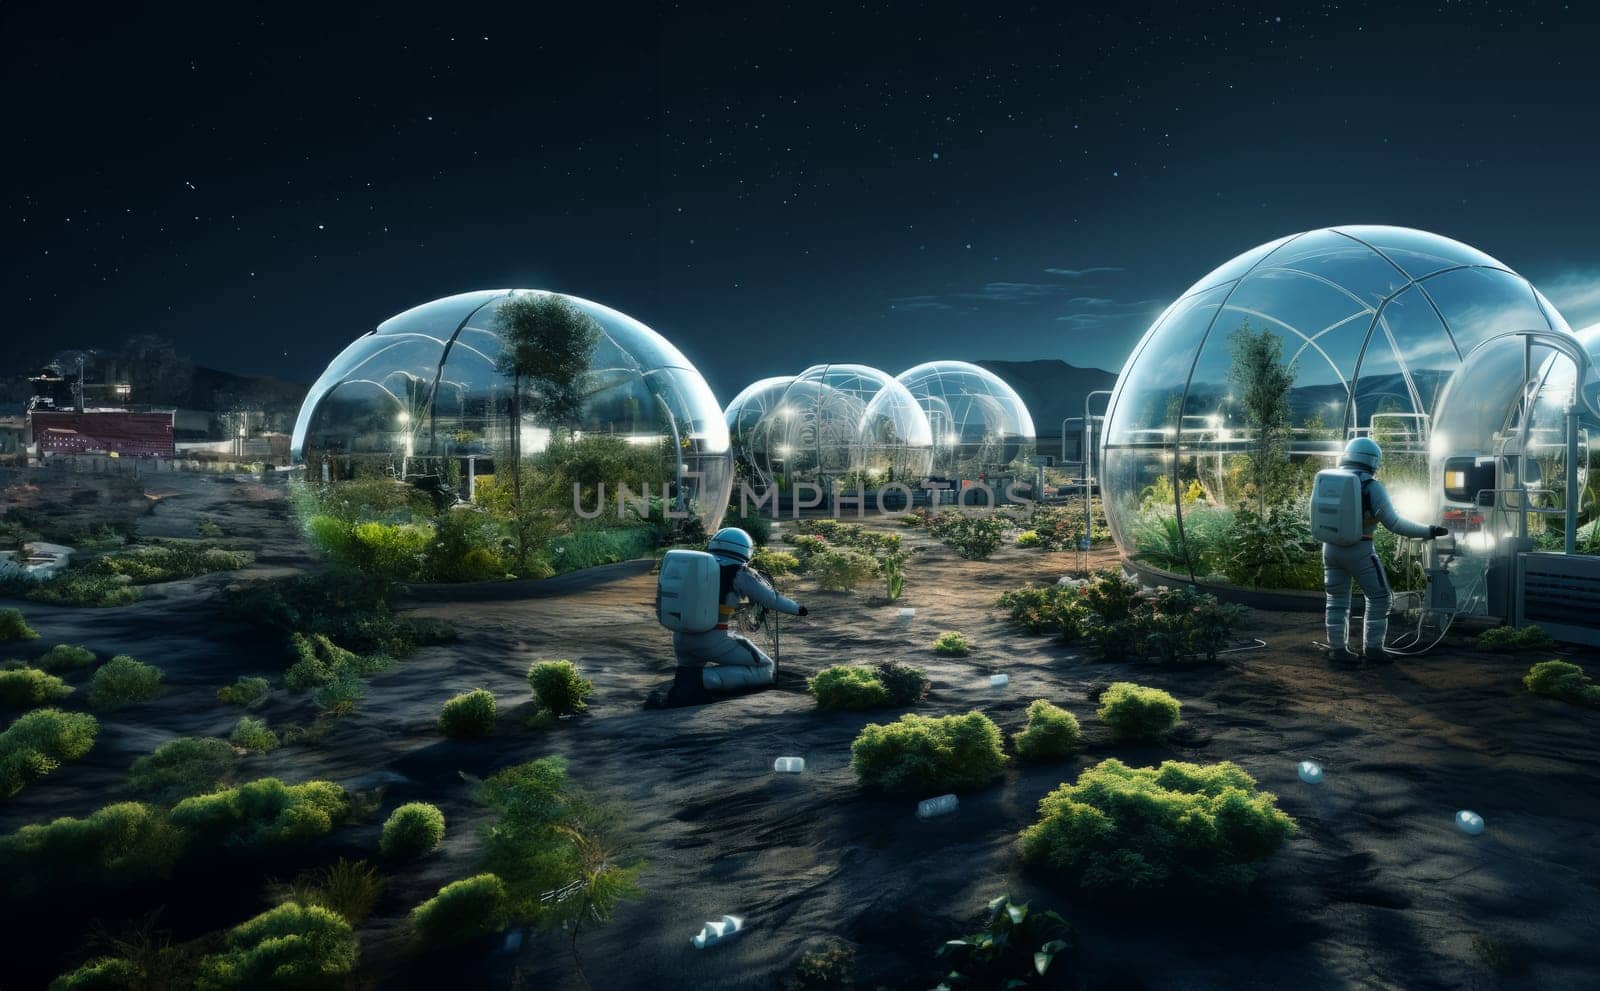 A futuristic depiction of agriculture shows cultivation and farming in glass enclosures on the surface of Mars in space, highlighting innovation and sustainability efforts in space colonization and exploration.Generated image.